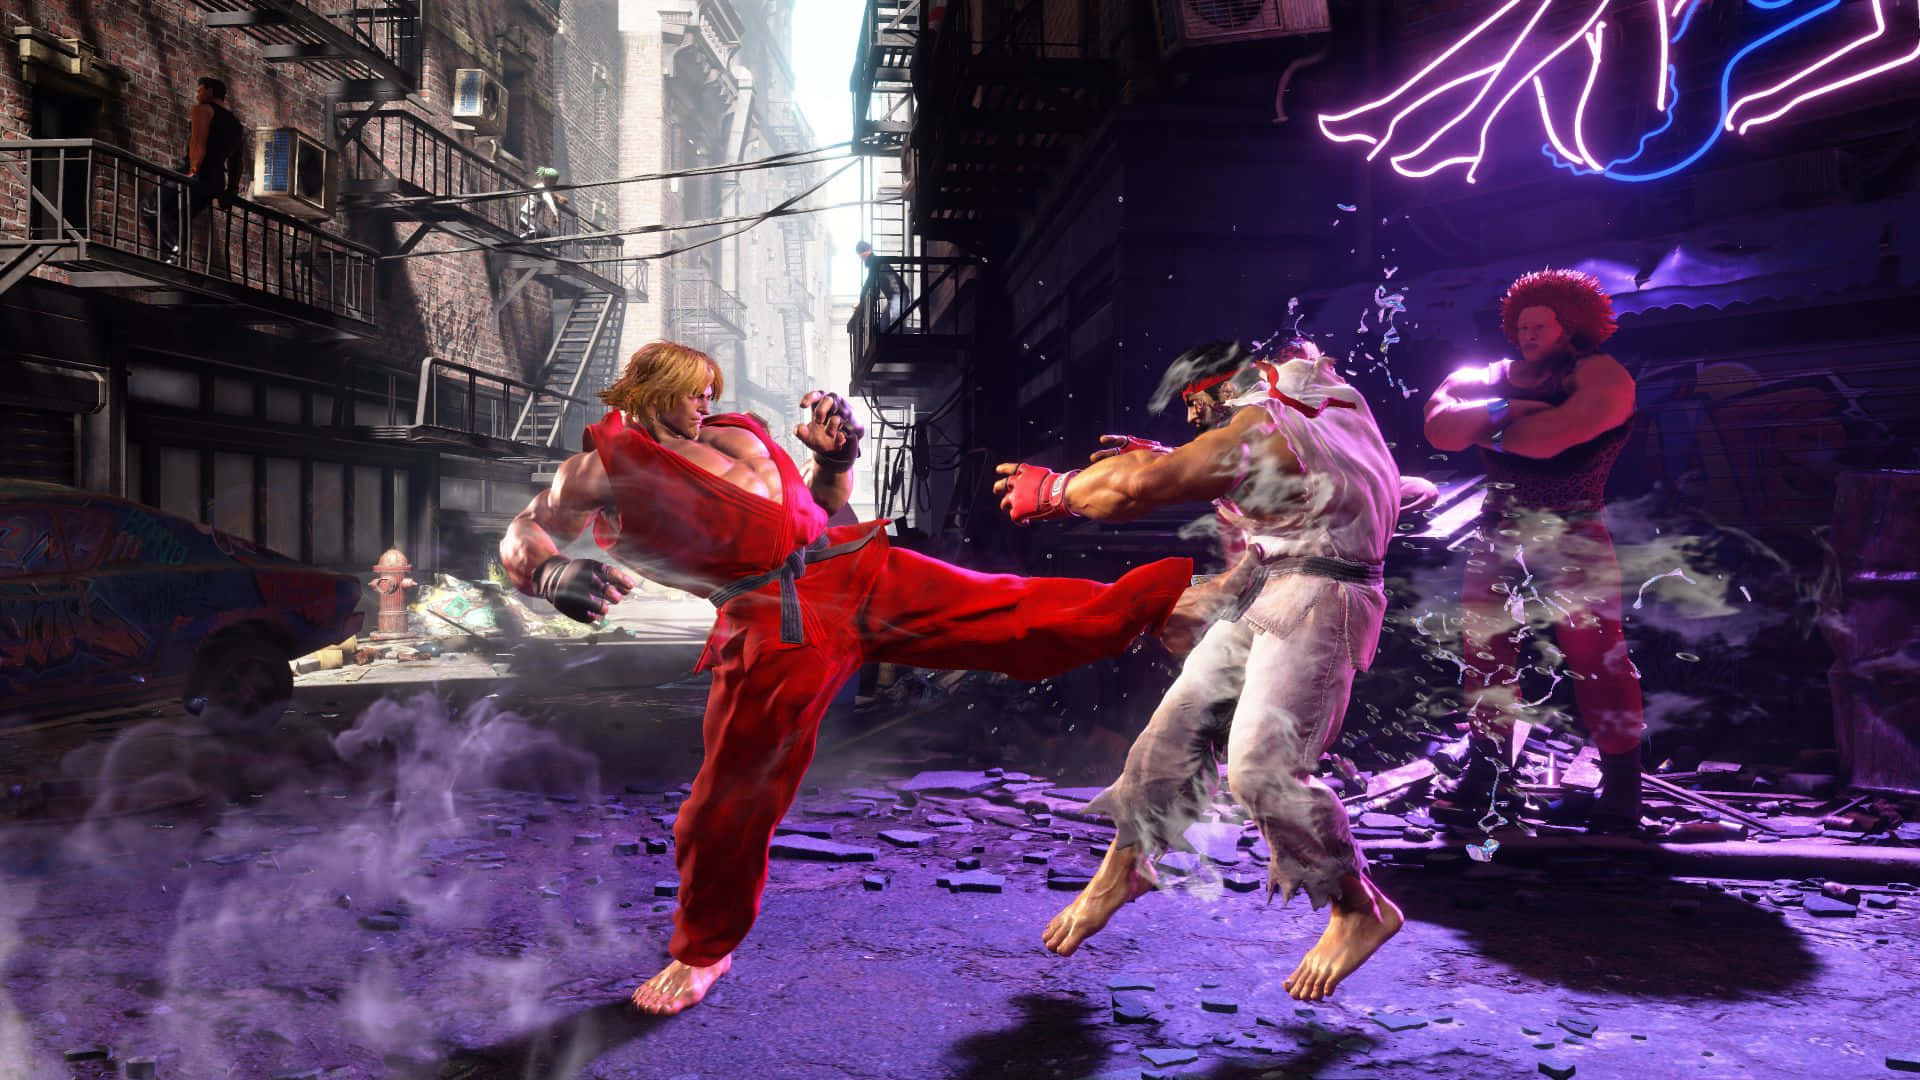 The ultimate fight starts now with Street Fighter!